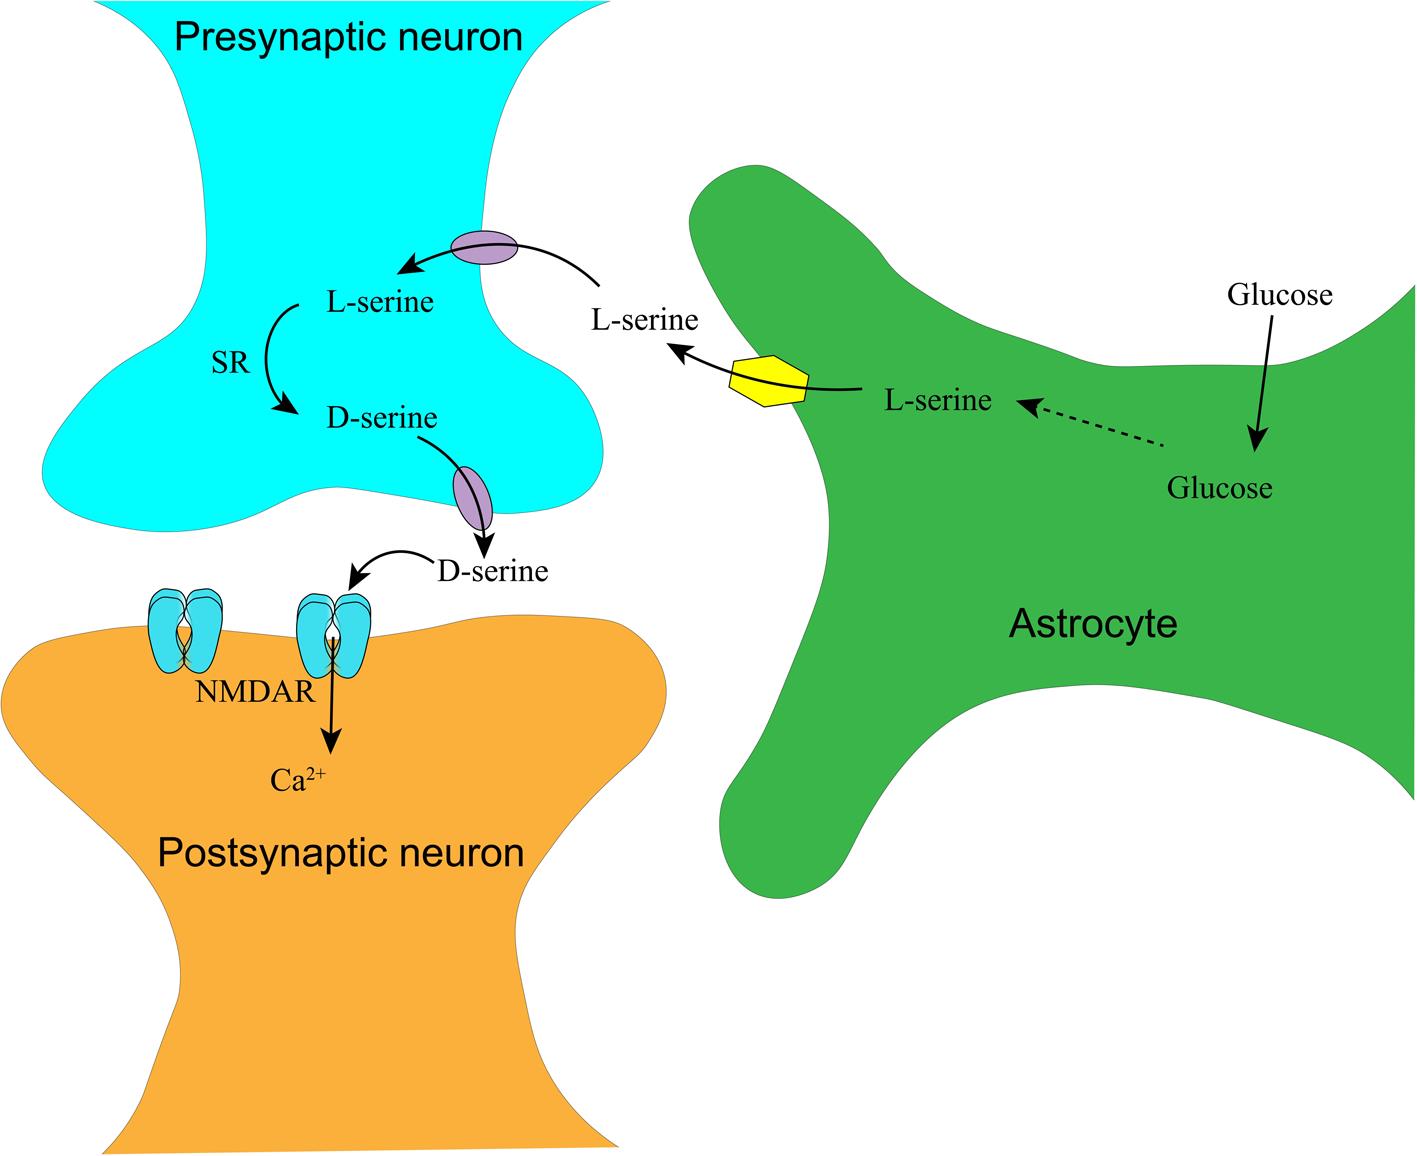 Synthesis and transport of D-serine in the central nervous system.